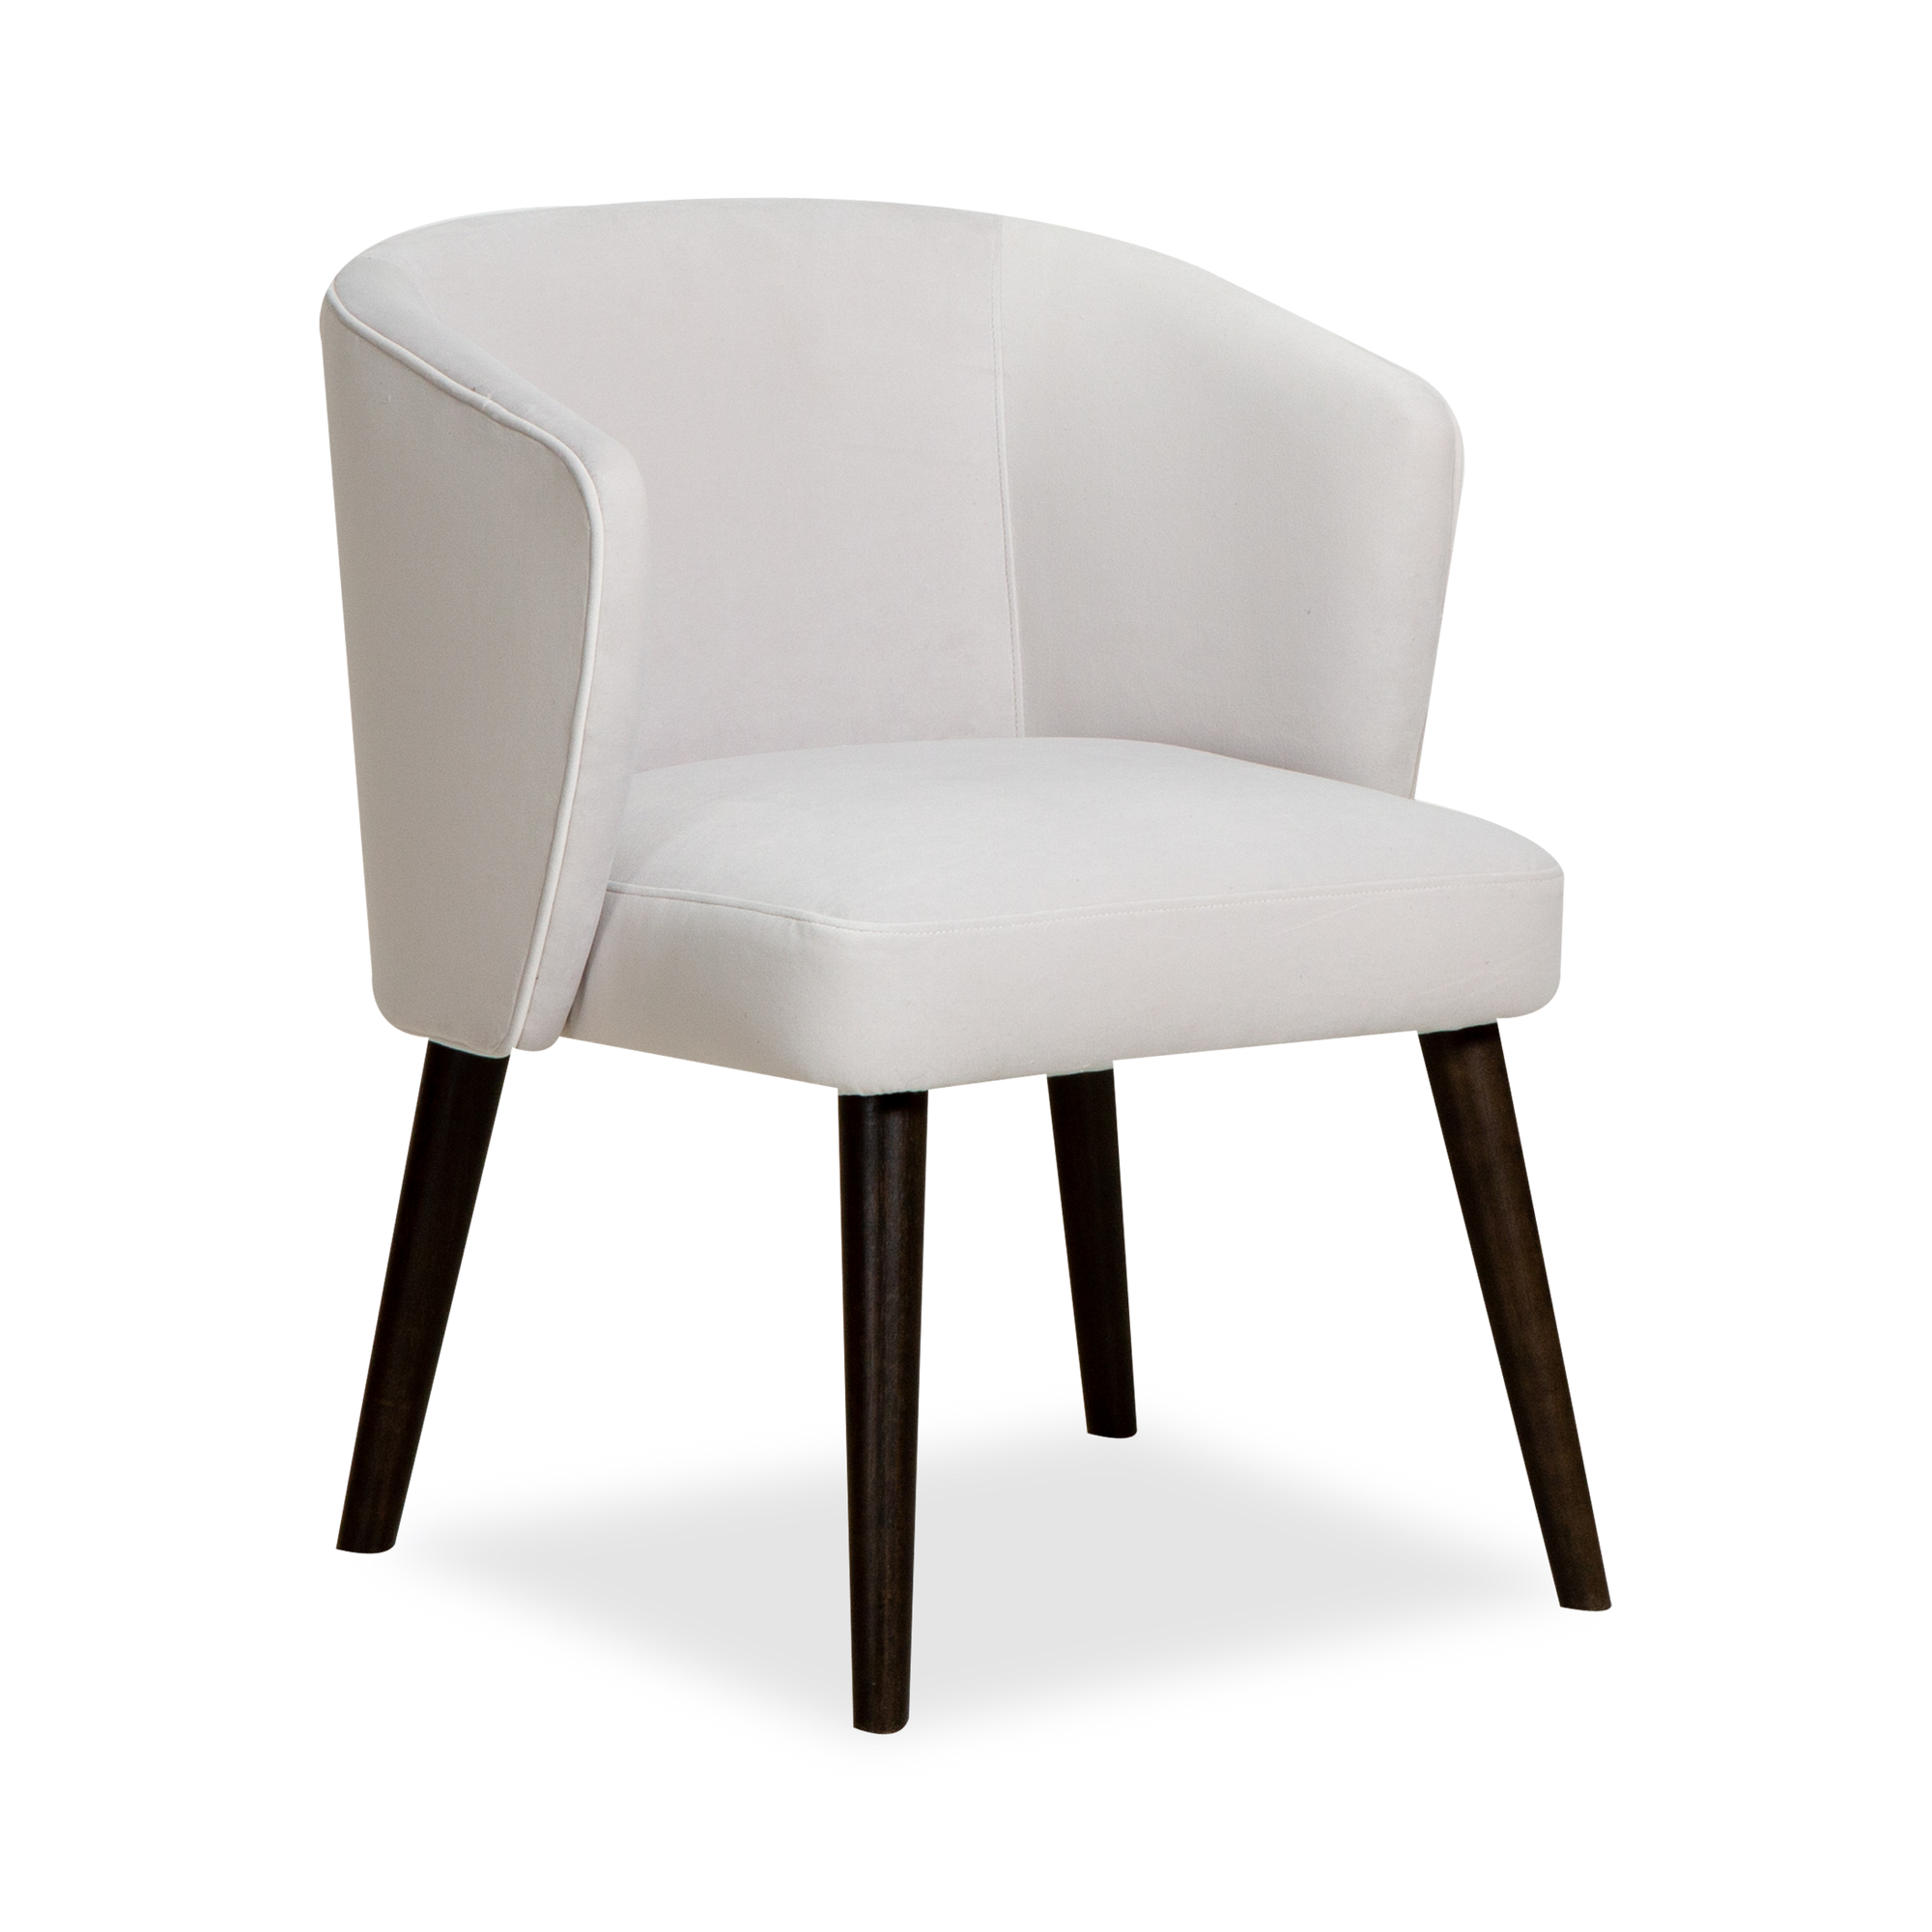 With a sheltered back and an accommodating seat, the Revolve dining chair brings style and comfort to your dining experience.